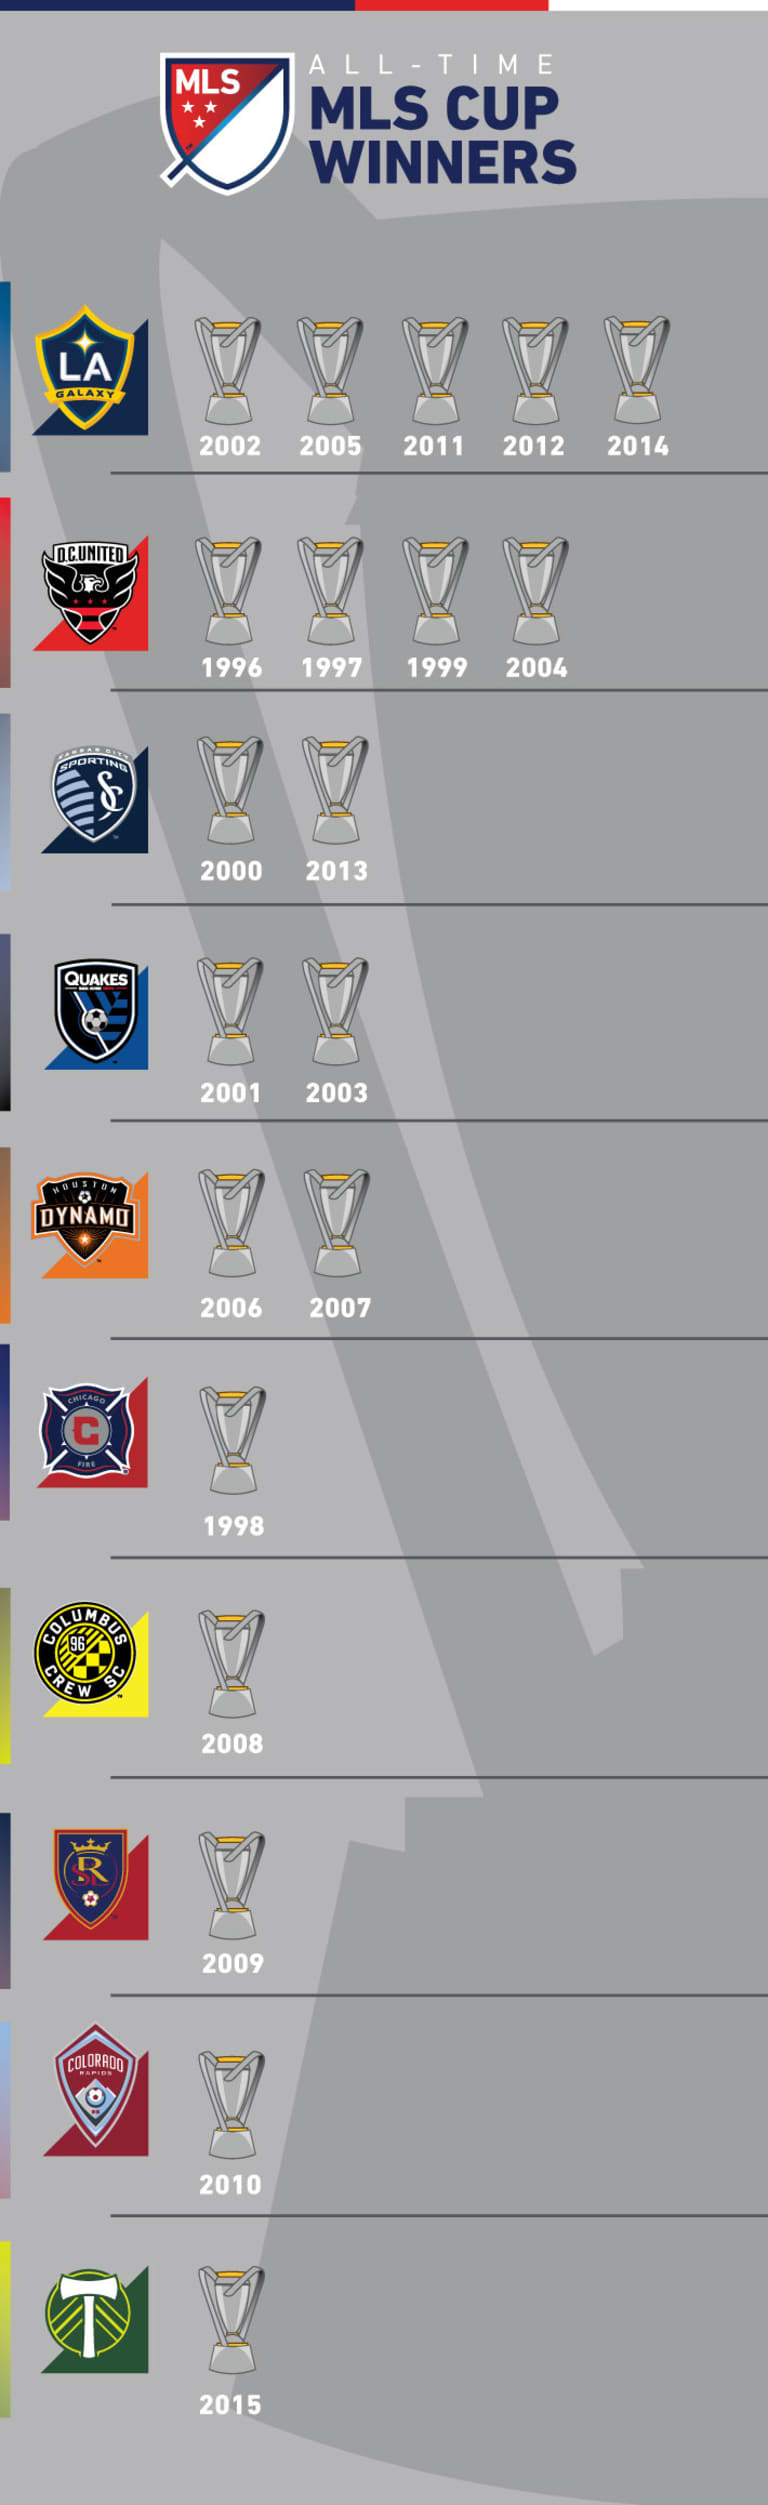 MLS Cup: The all-time list of league champions since 1996 - https://league-mp7static.mlsdigital.net/images/MLSCupWinners.jpeg